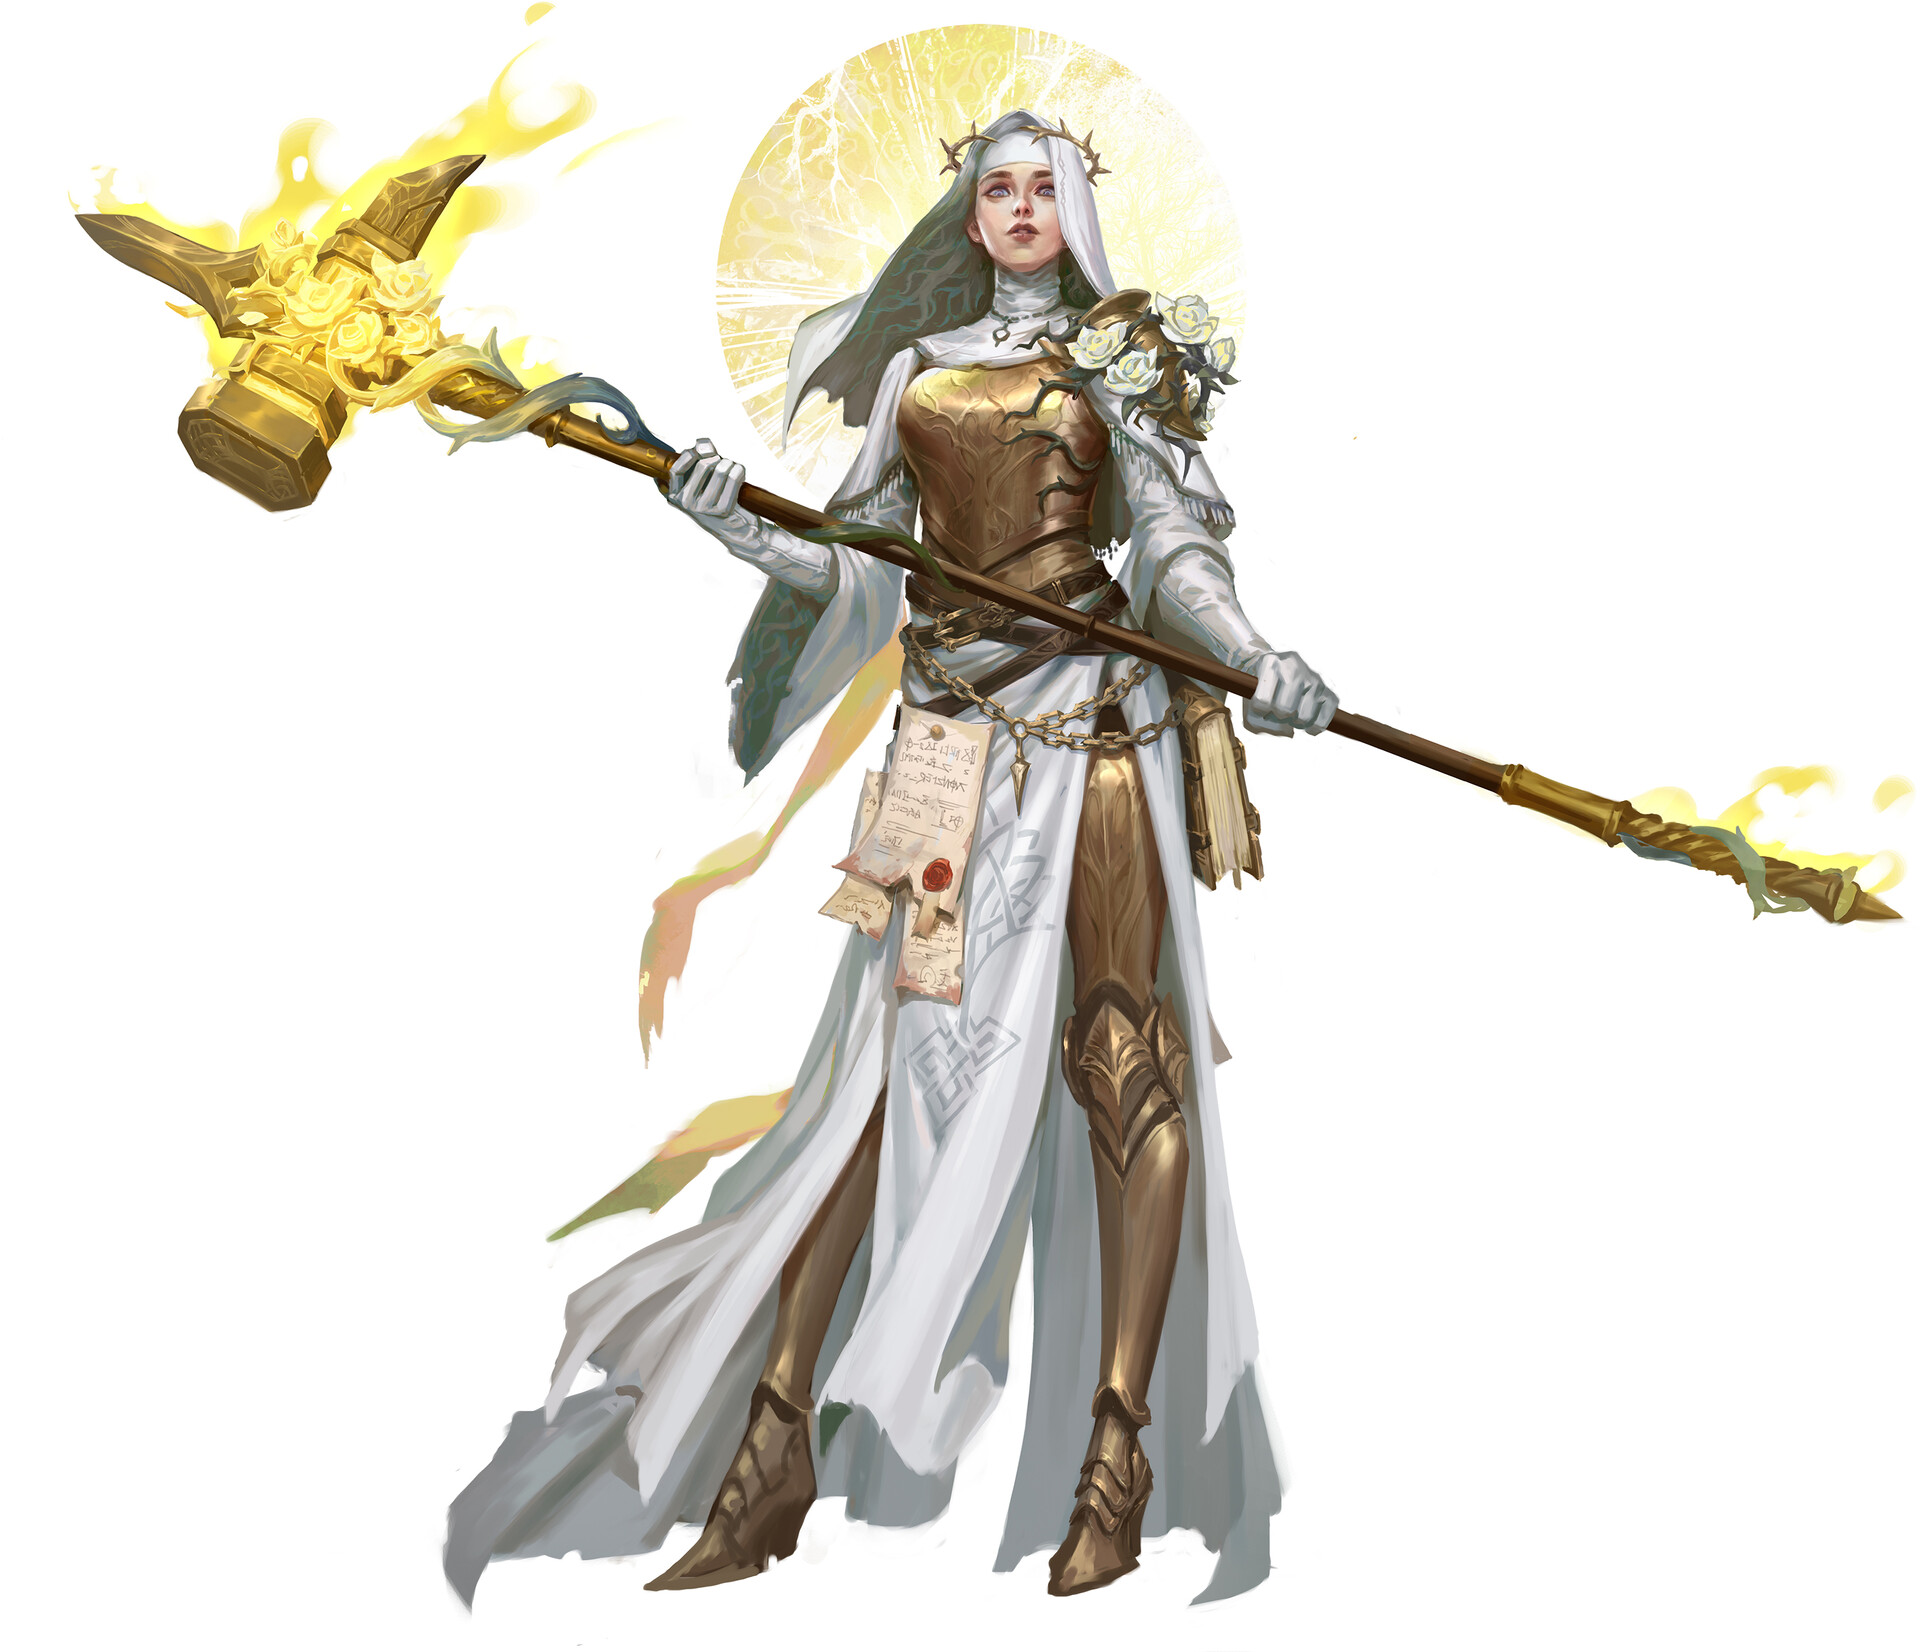 General 1920x1652 Sun Haiyang drawing women cleric hammer fantasy art white background simple background minimalism long hair looking at viewer fantasy girl armor weapon flowers